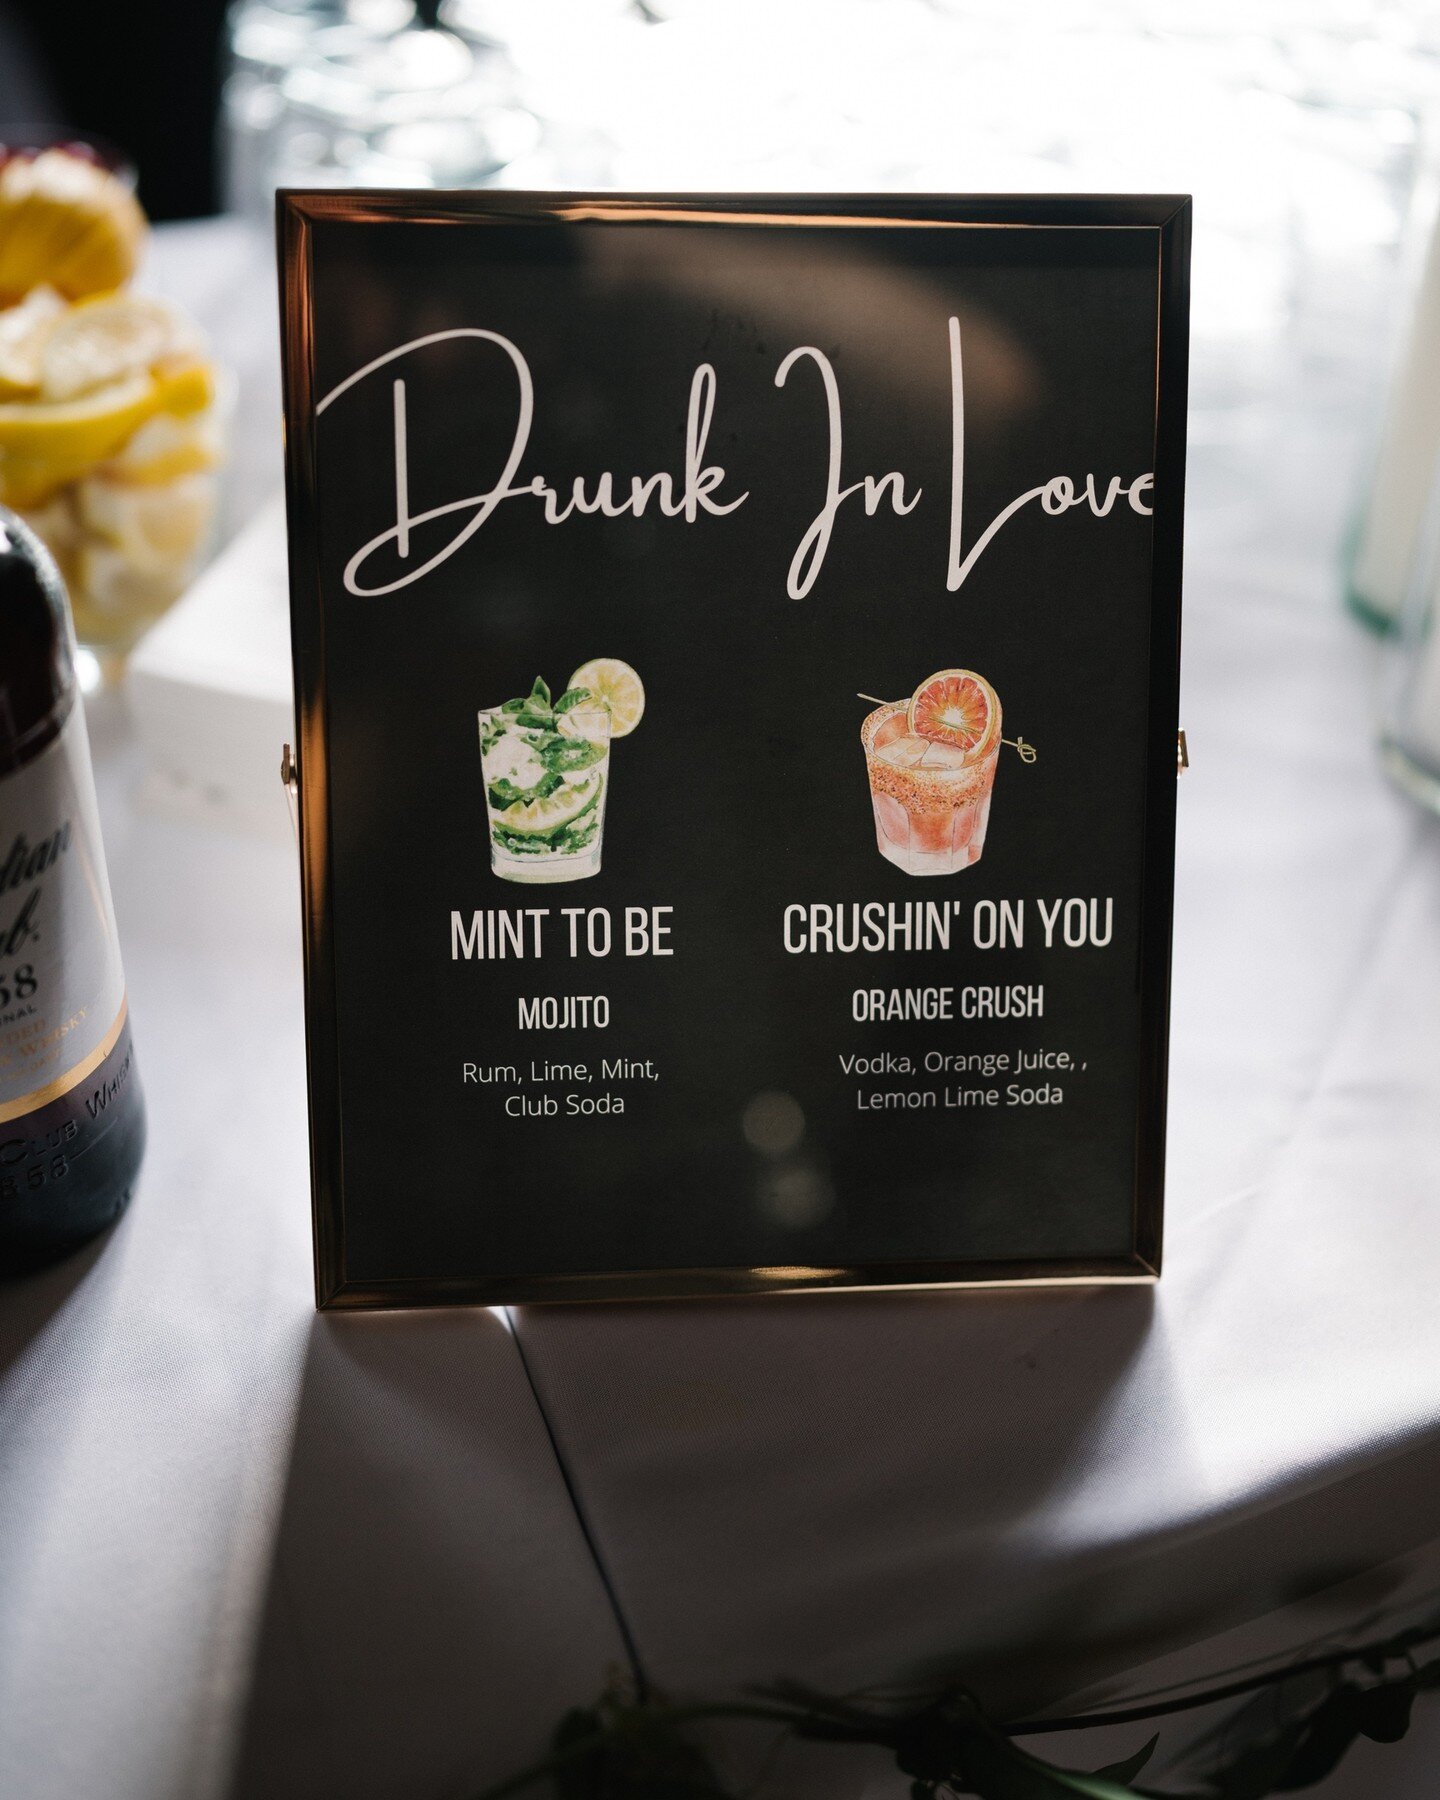 It&rsquo;s the Beyonce quote for me&hellip; 😍

Signature drinks are a cute way to add a small personal touch to your day. You can also offer beer and wine only, plus signature cocktails as a way to cut down on bar costs by not offering other liquor 